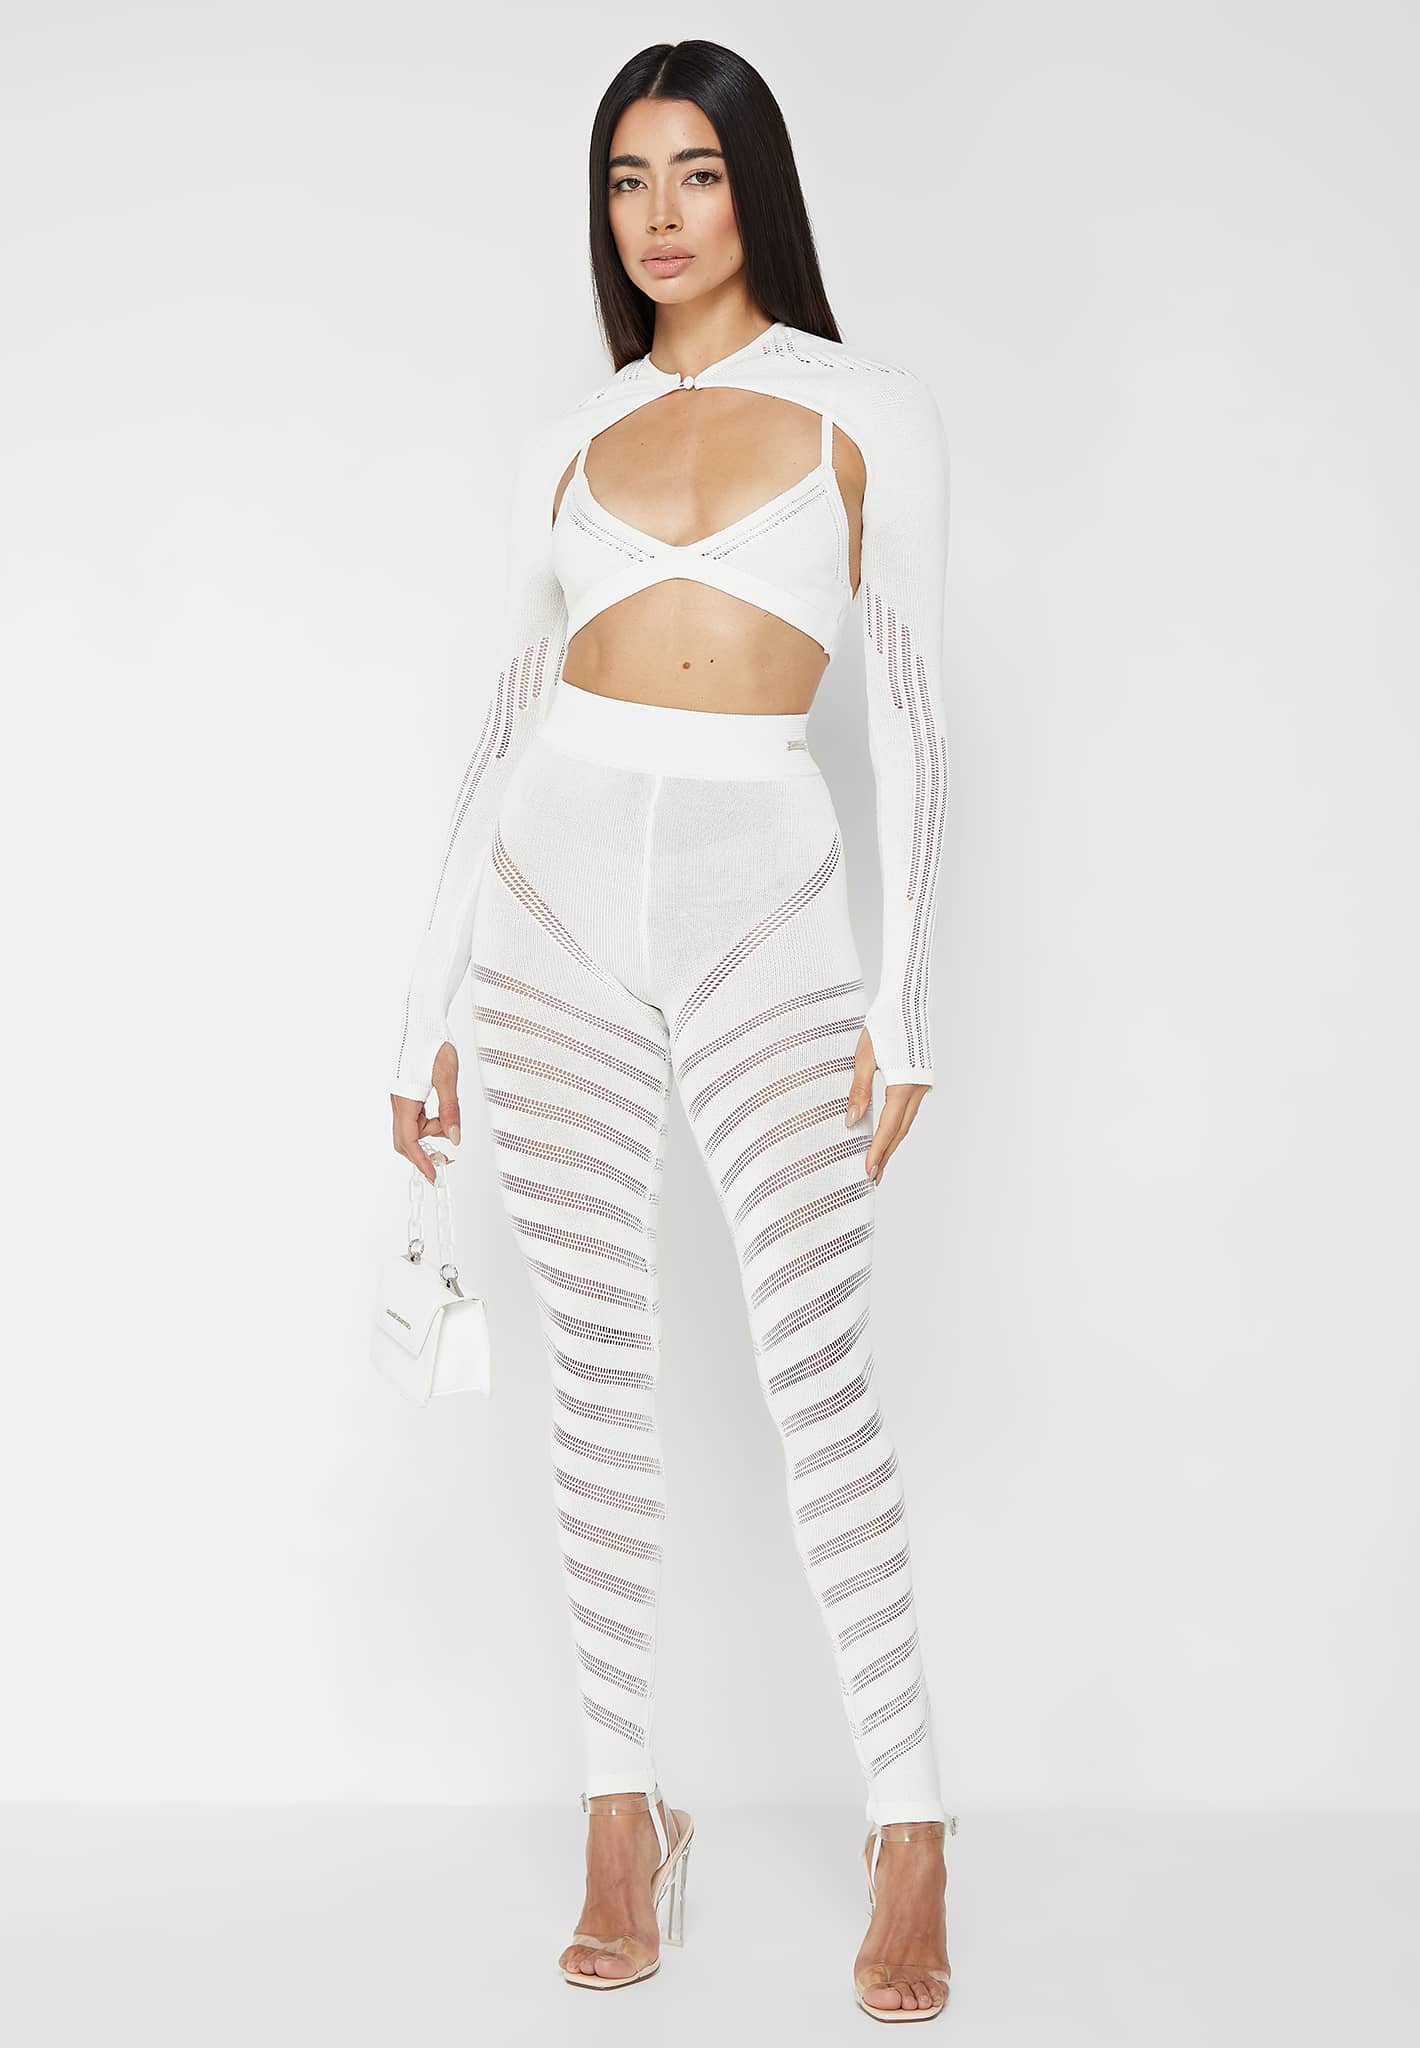 knitted-sleeve-overlay-with-bralette-white